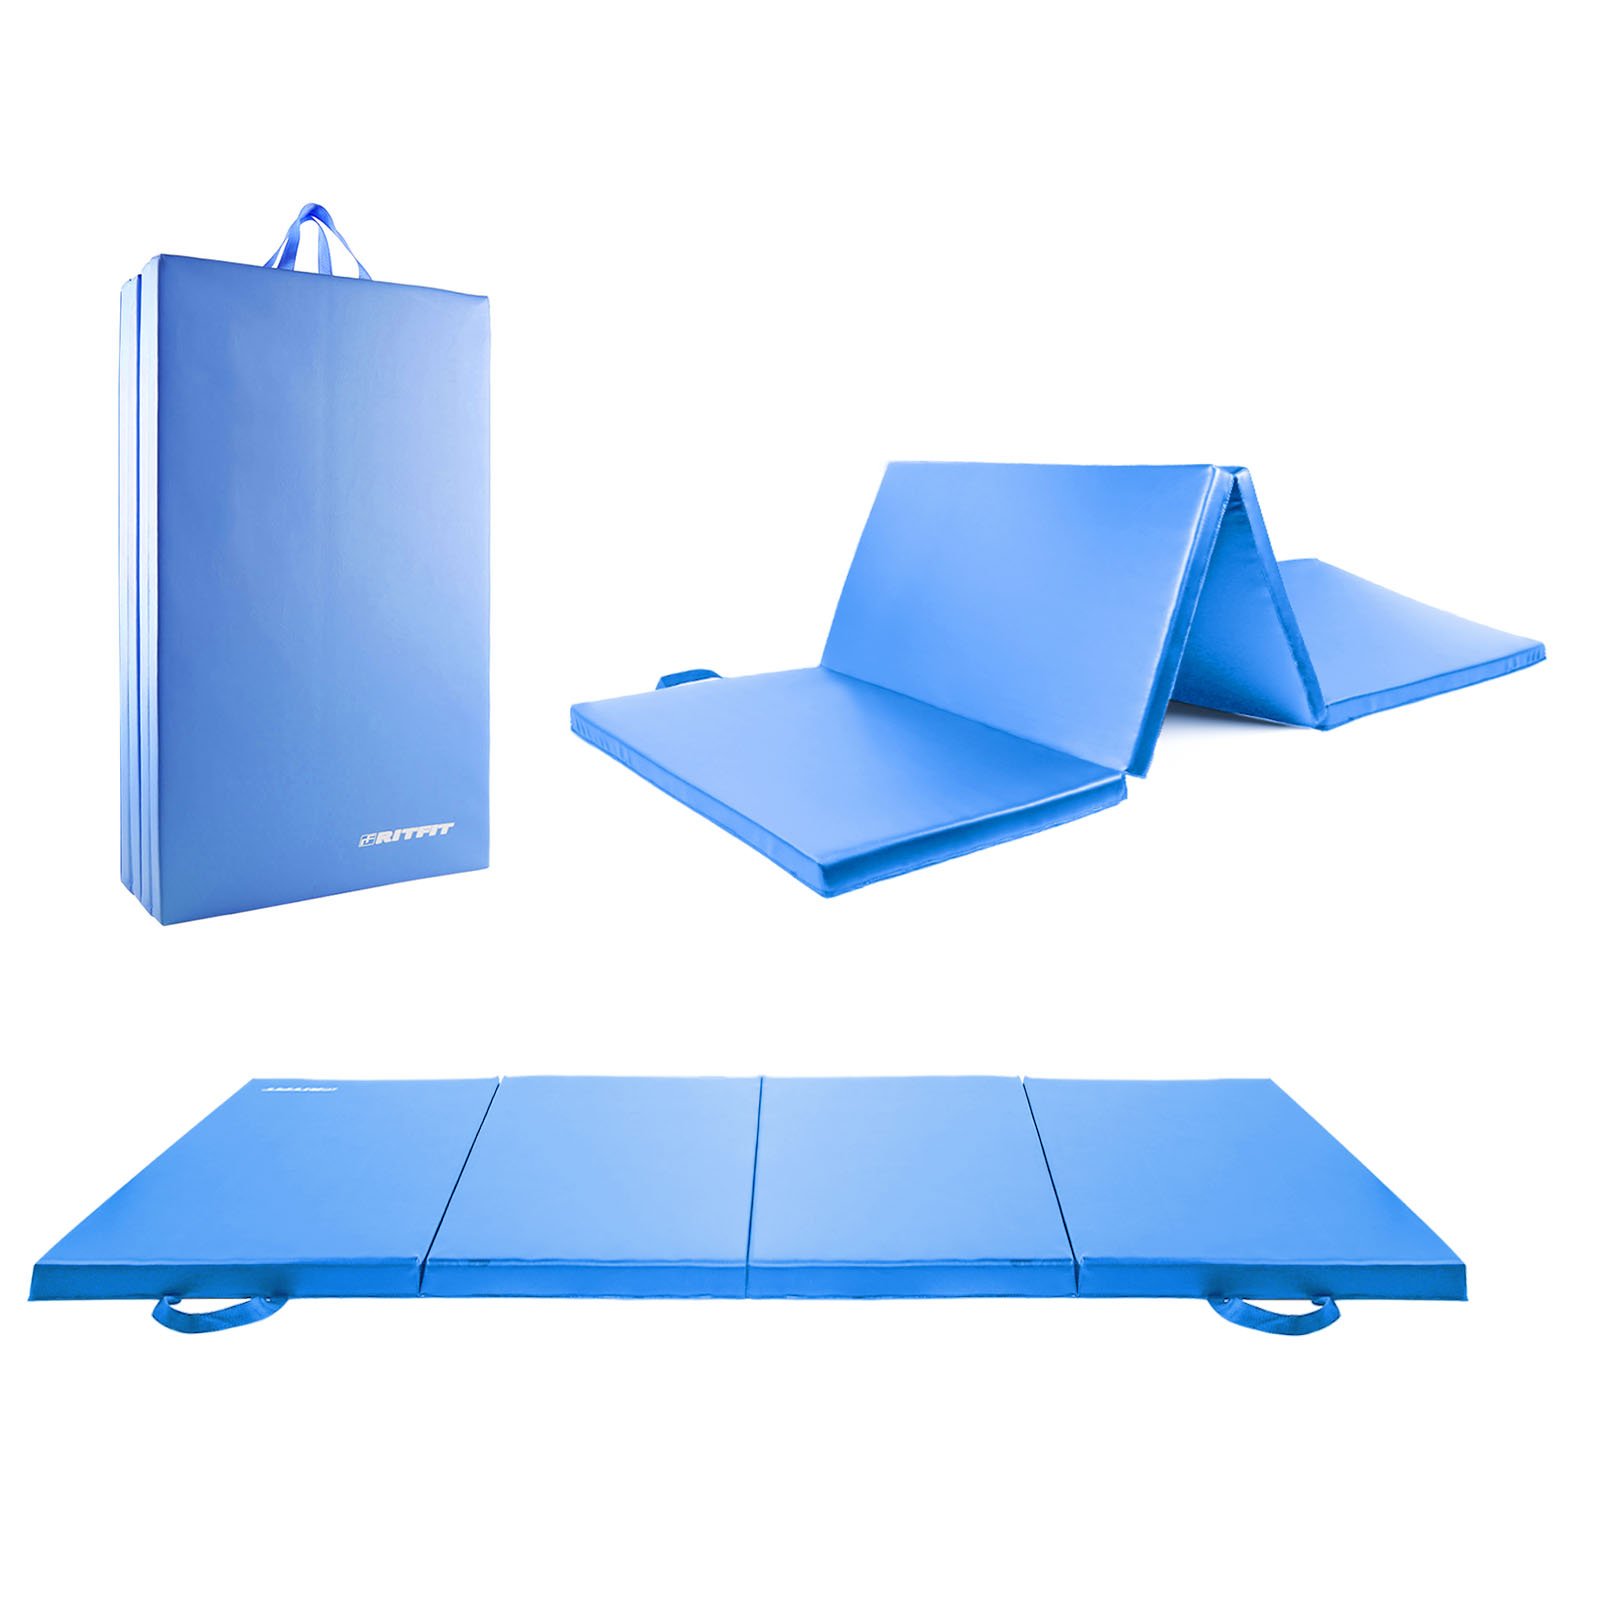 PROSOURCEFIT Tri-Fold Folding Thick Exercise Mat Blue 6 ft. x 2 ft